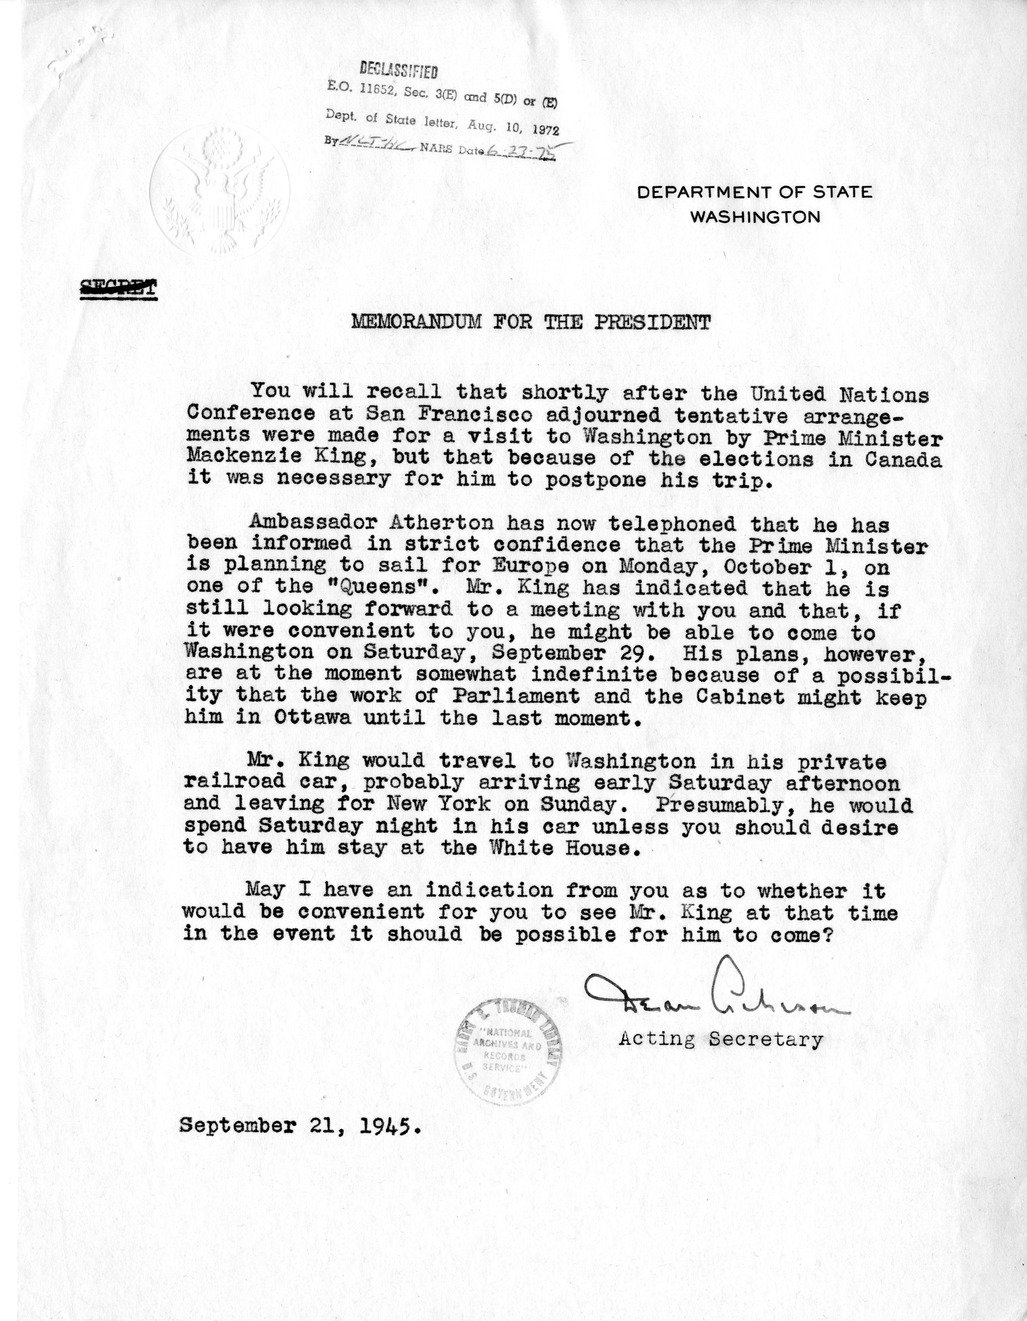 Correspondence Between Acting Secretary of State Dean Acheson and President Harry S. Truman